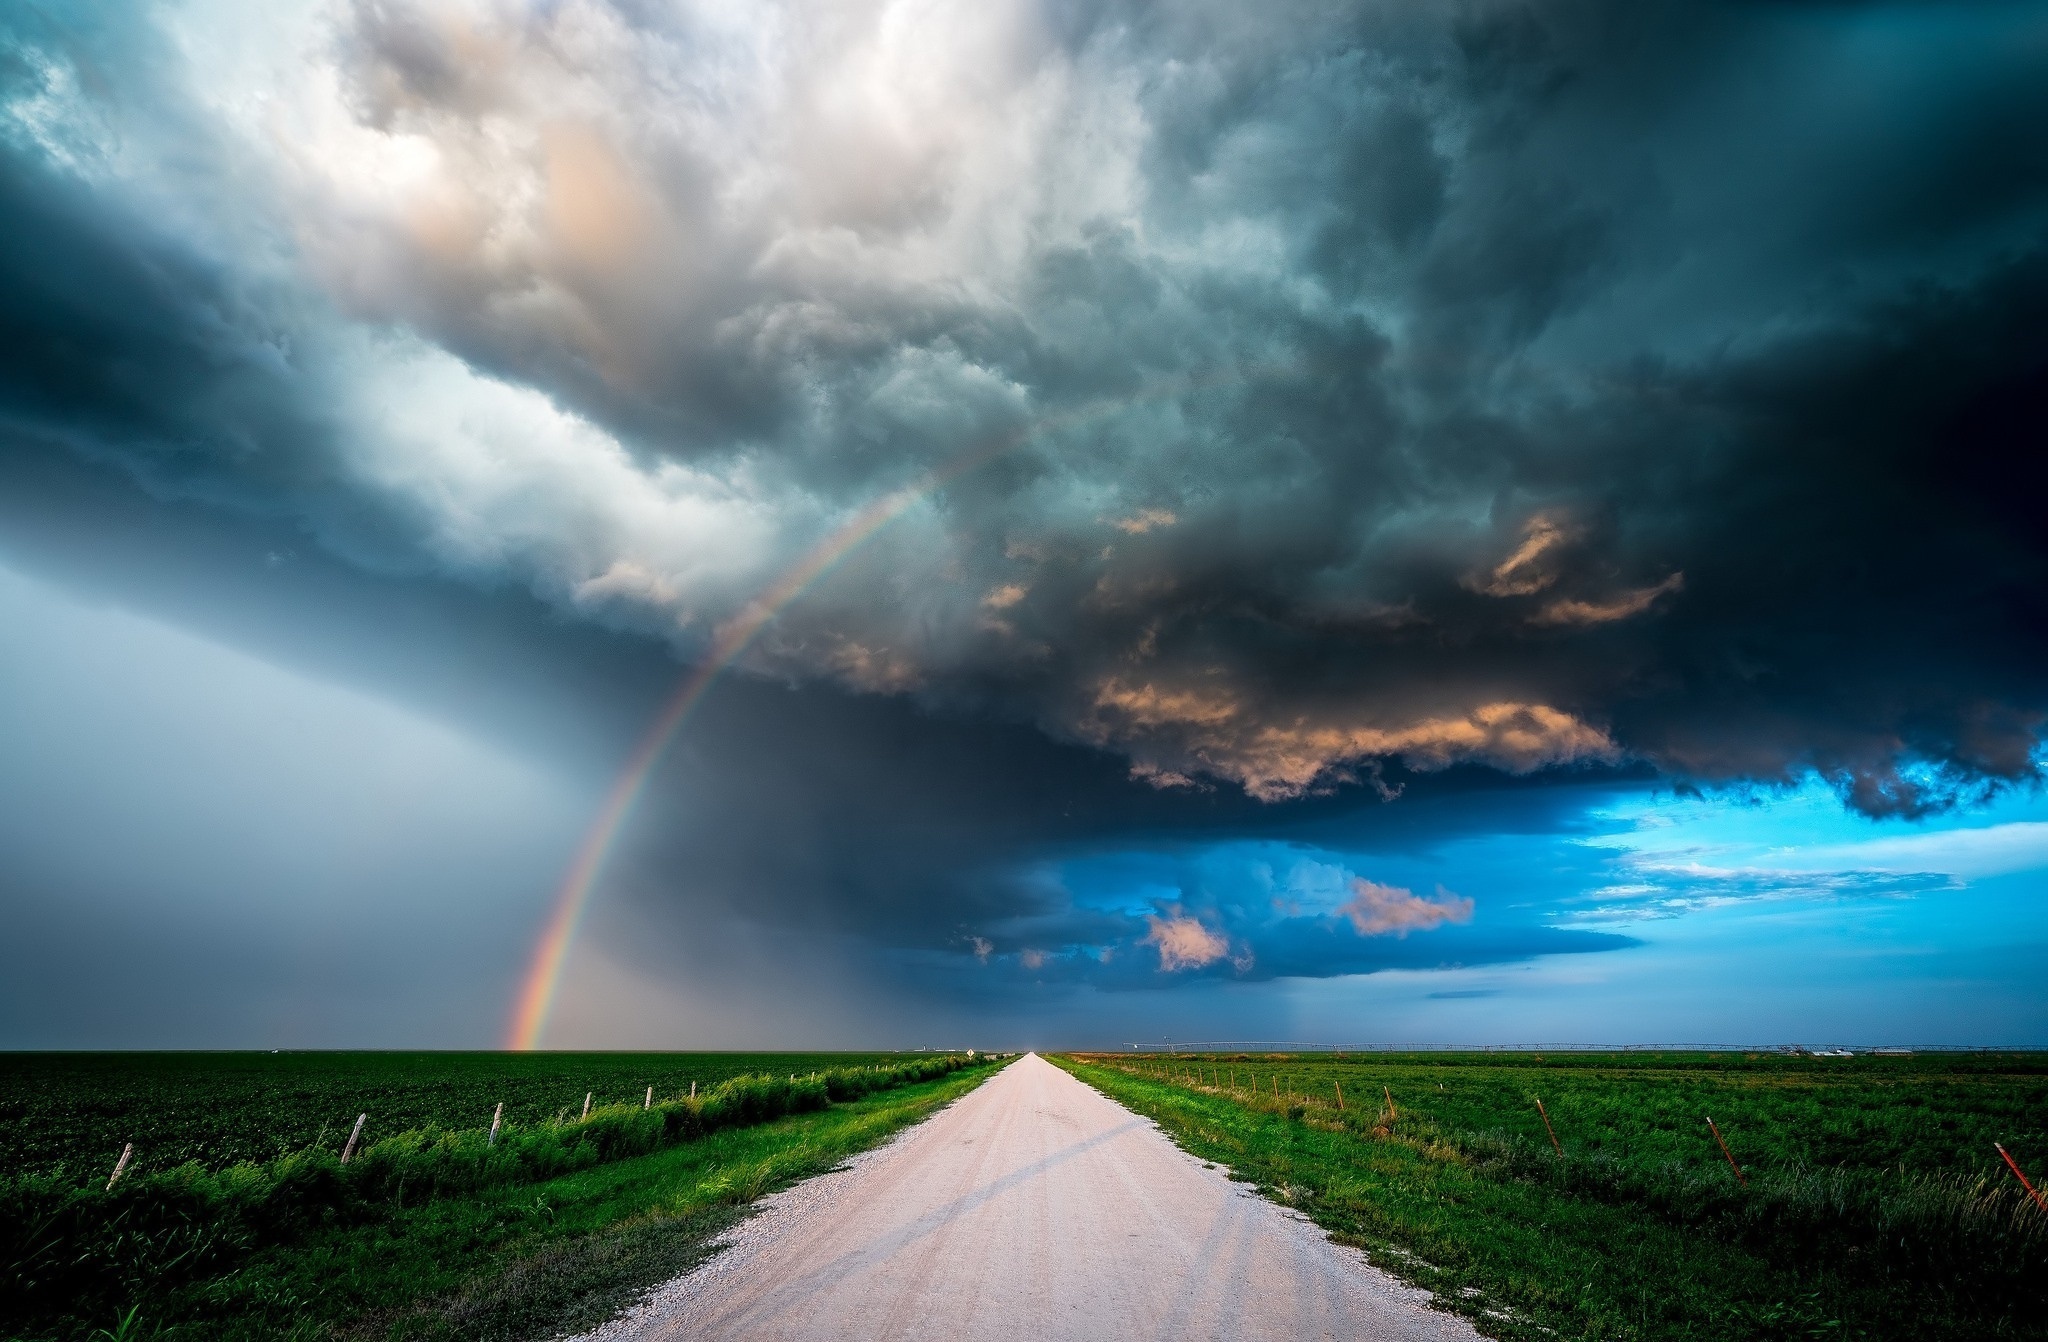 Wallpaper. Beautiful picture. photo. picture. photo, nature, cyclone, rainbow, road